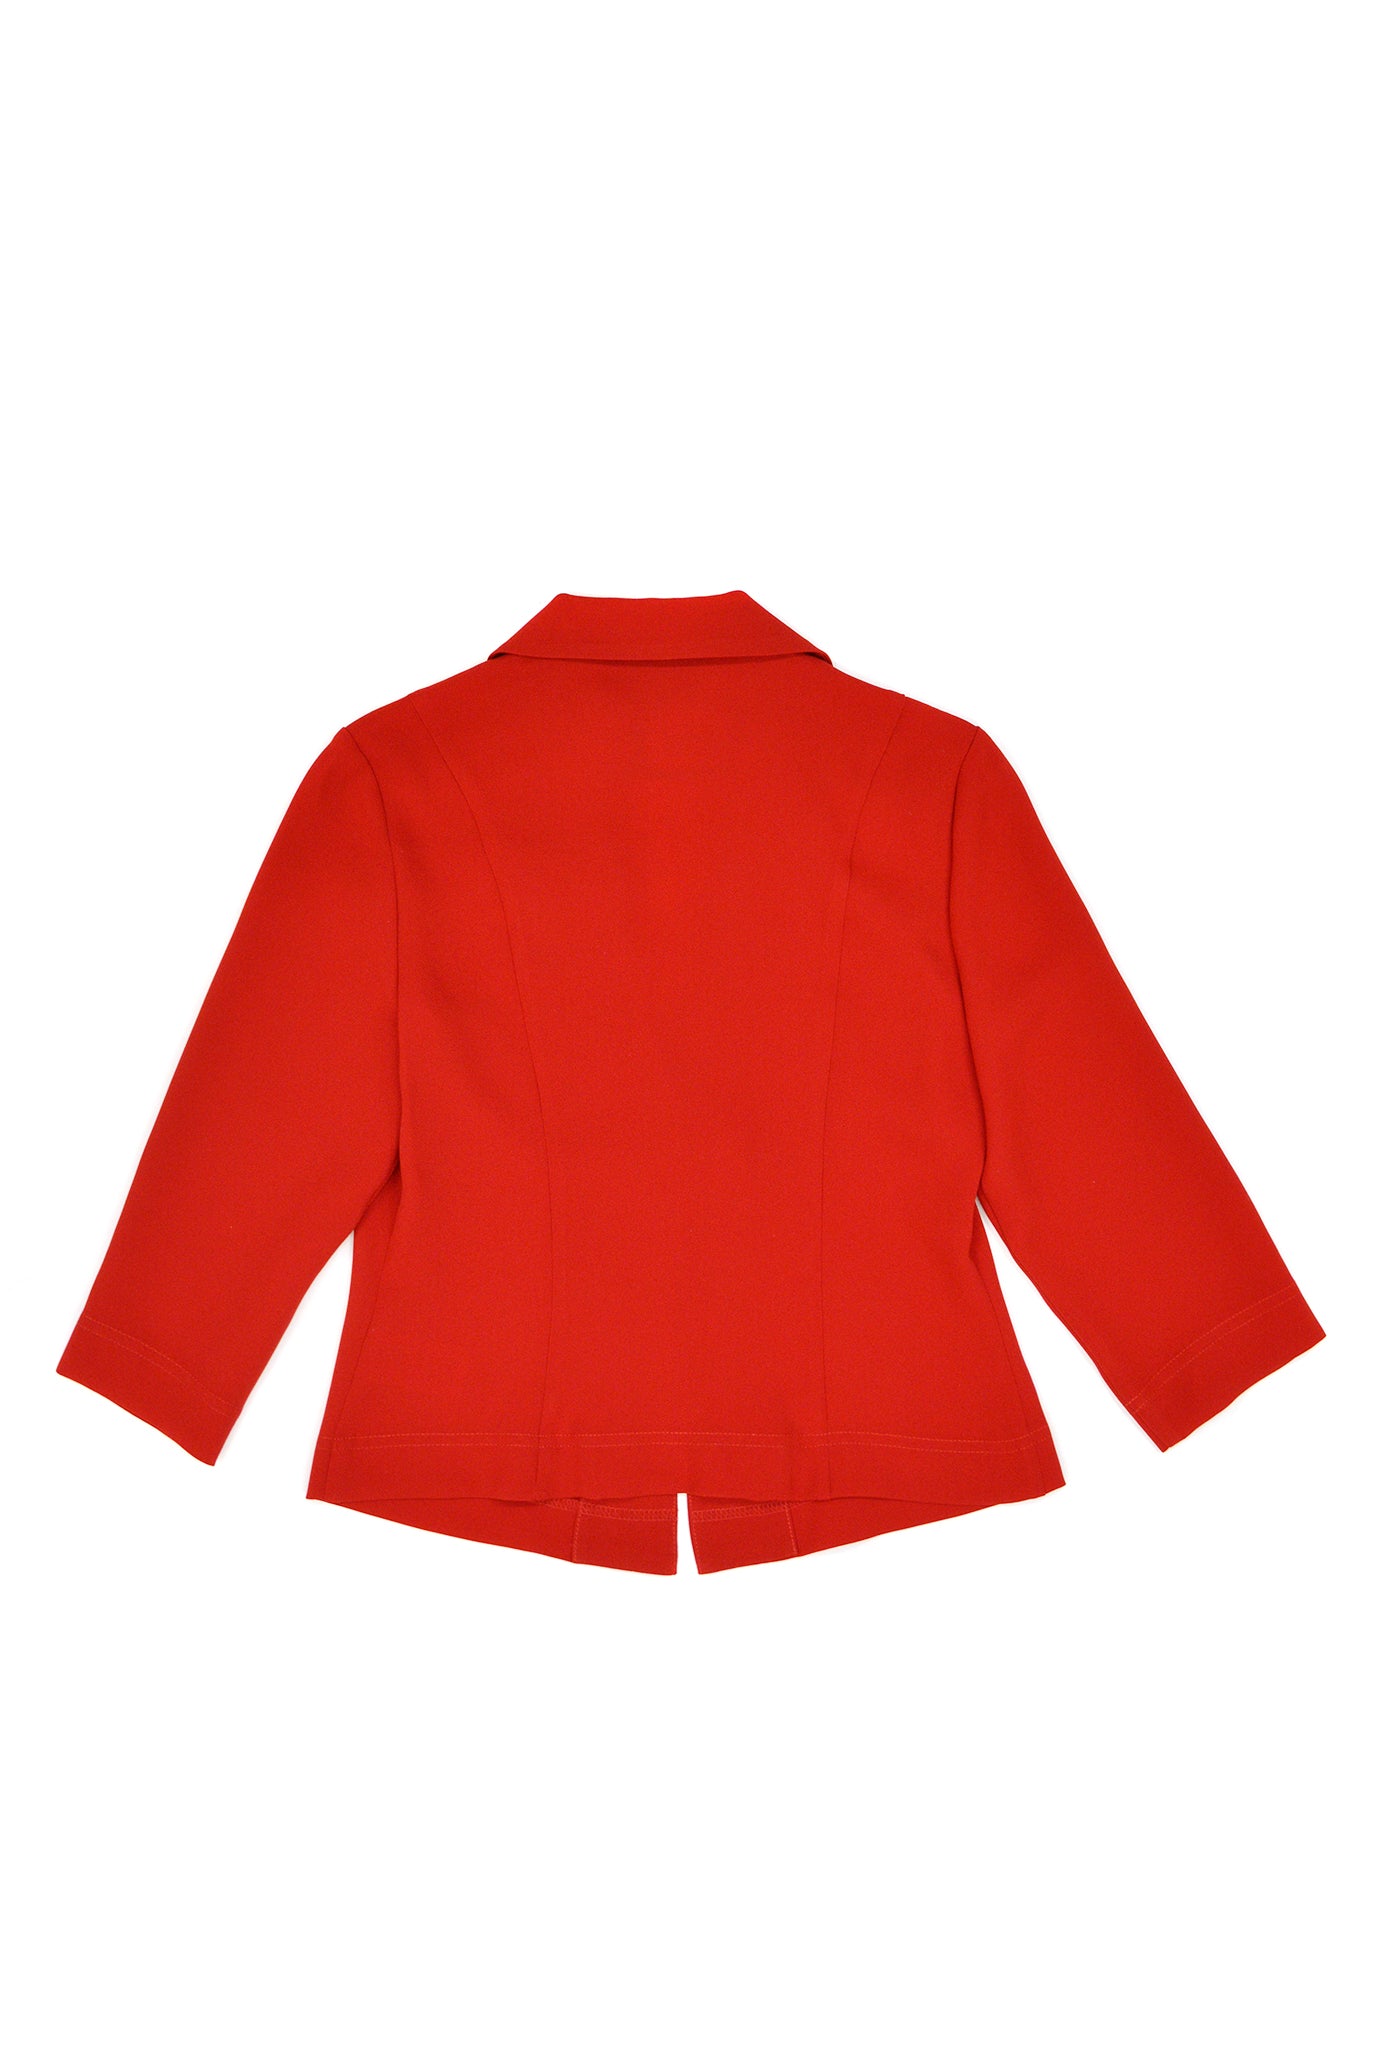 Puppets and Puppets Fitted Blazer, Red